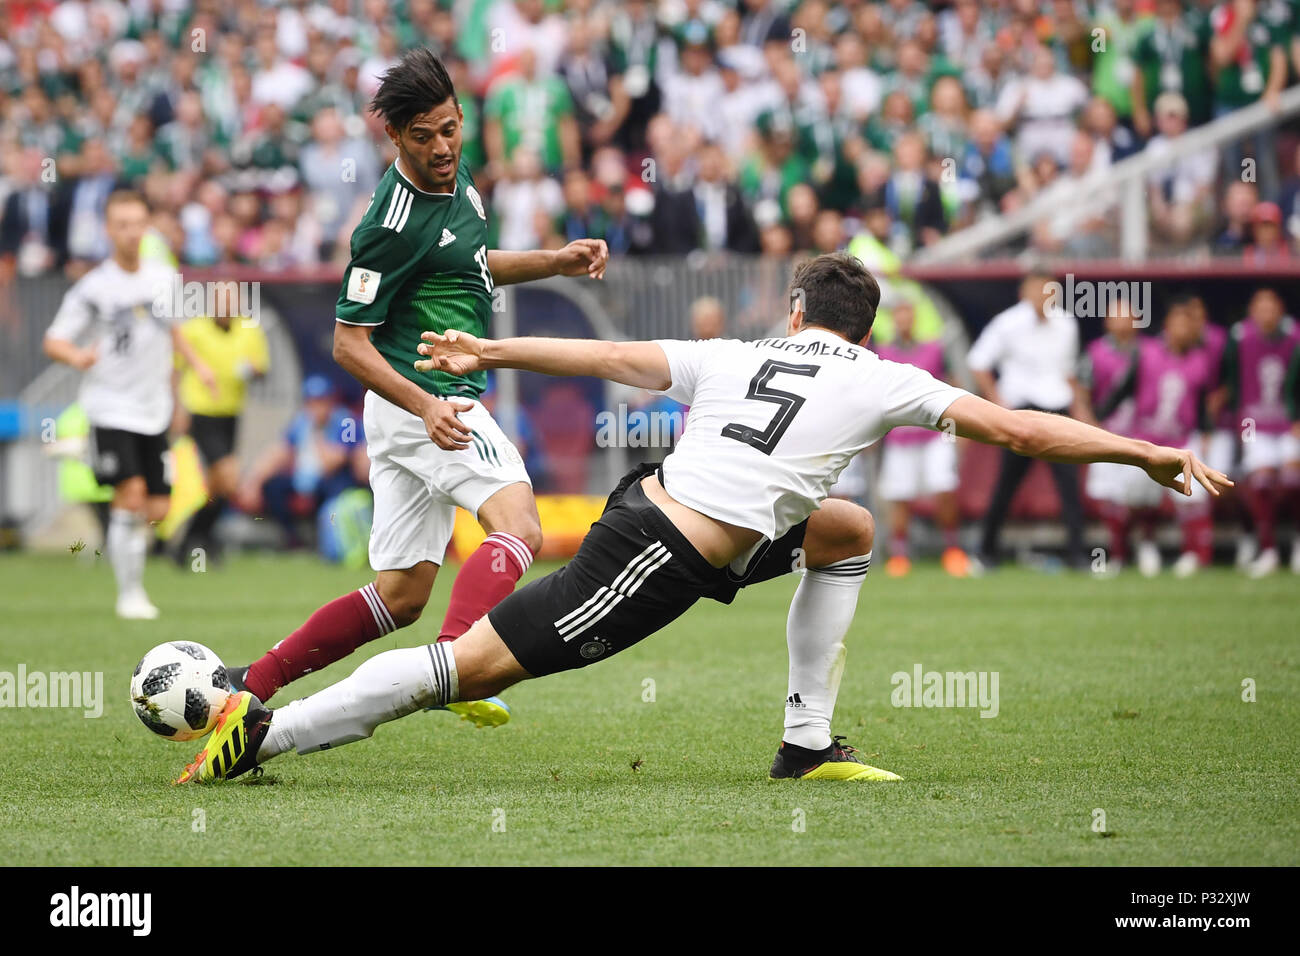 Moscow, Russia. 17th June, 2018. Carlos Vela (Mexico, l.) Versus Mats Hummels (Germany, r.). GES/Football/World Cup 2018 Russia: Germany - Mexico, 17.06.2018 GES/Soccer/Football/Worldcup 2018 Russia: Germany vs Mexico, Moscow, June 17, 2018 | usage worldwide Credit: dpa/Alamy Live News Stock Photo